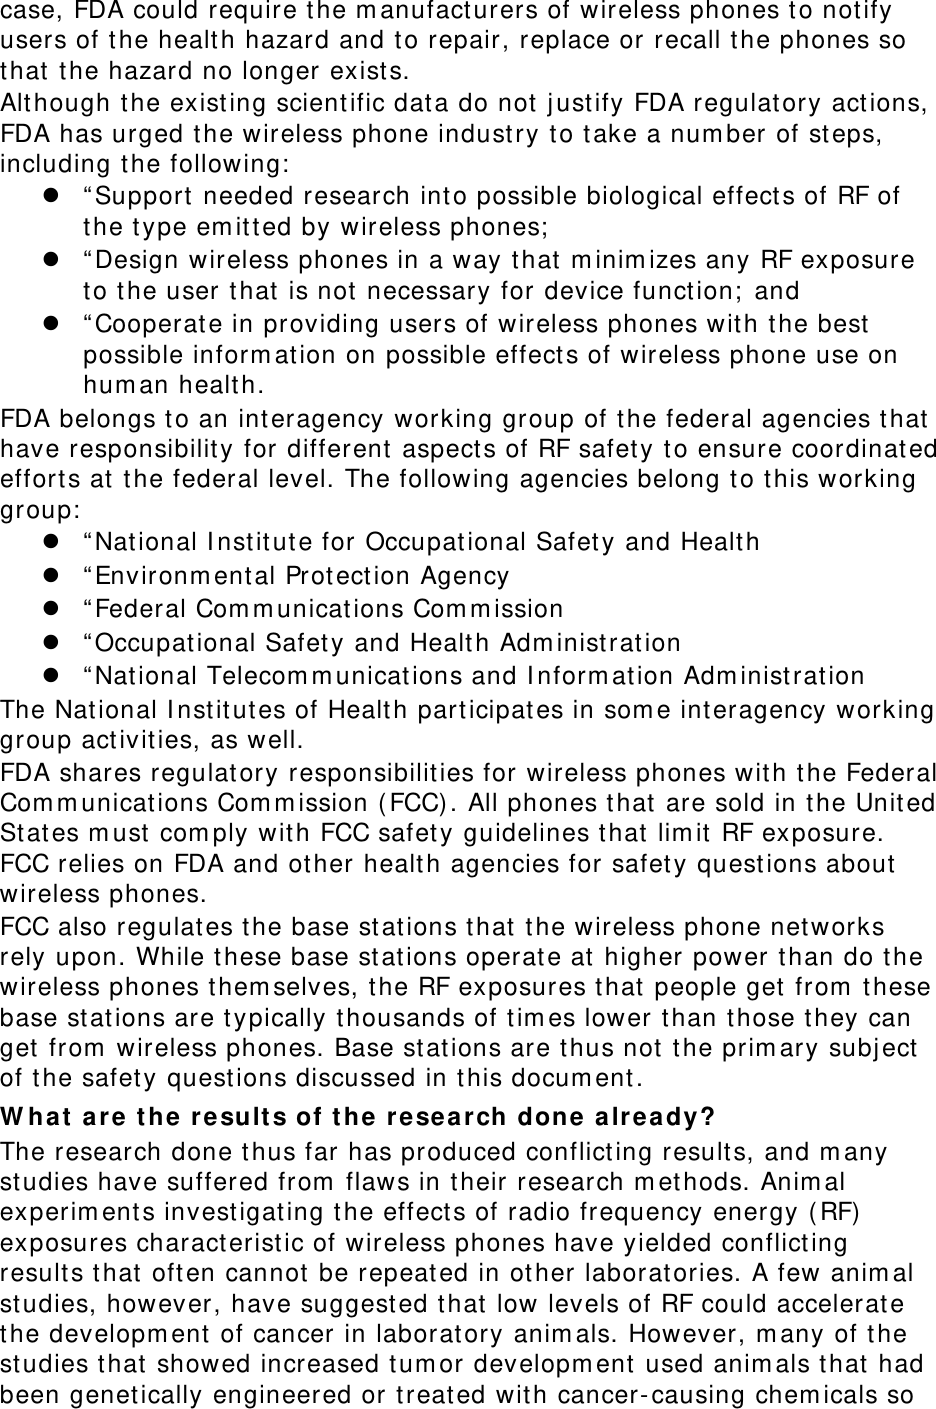 case, FDA could require the m anufact urers of wireless phones to notify users of the health hazard and to repair, replace or recall t he phones so that t he hazard no longer exist s. Alt hough the existing scientific dat a do not j ust ify FDA regulat ory act ions, FDA has urged t he wireless phone indust ry to t ake a num ber of st eps, including t he following:  z “ Support  needed research into possible biological effect s of RF of the type em itted by wireless phones;  z “ Design wireless phones in a way that m inim izes any RF exposure to the user t hat  is not necessary for device function;  and z “ Cooperate in providing users of wireless phones with t he best  possible inform ation on possible effect s of wireless phone use on hum an healt h. FDA belongs to an int eragency working group of t he federal agencies that have responsibilit y for different  aspects of RF safety to ensure coordinated efforts at the federal level. The following agencies belong to t his working group:  z “ National I nst itut e for Occupational Safety and Health z “ Environm ent al Protect ion Agency z “ Federal Com m unicat ions Com m ission z “ Occupat ional Safet y and Health Adm inistrat ion z “ National Telecom m unications and I nform ation Adm inist rat ion The National I nst itut es of Health part icipat es in som e int eragency working group act ivities, as well. FDA shares regulat ory responsibilities for wireless phones with t he Federal Com m unications Com m ission ( FCC). All phones t hat  are sold in t he United St ates m ust com ply with FCC safet y guidelines that lim it RF exposure. FCC relies on FDA and other health agencies for safet y quest ions about  wireless phones. FCC also regulat es the base stat ions t hat t he wireless phone networks rely upon. While t hese base st at ions operat e at  higher power t han do the wireless phones them selves, t he RF exposures that people get  from  t hese base stat ions are typically thousands of tim es lower than those t hey can get  from  wireless phones. Base st ations are thus not  the prim ary subj ect  of t he safet y quest ions discussed in this docum ent. W hat  are  t he r esult s of t he r esear ch done a lr eady? The research done thus far has produced conflict ing result s, and m any studies have suffered from  flaws in t heir research m et hods. Anim al experim ents invest igat ing t he effect s of radio frequency energy ( RF)  exposures charact eristic of wireless phones have yielded conflict ing results t hat often cannot be repeat ed in other laboratories. A few anim al studies, however, have suggest ed t hat low levels of RF could accelerate the developm ent of cancer in laboratory anim als. However, m any of t he studies t hat showed increased t um or developm ent used anim als t hat had been genet ically engineered or t reat ed wit h cancer- causing chem icals so 